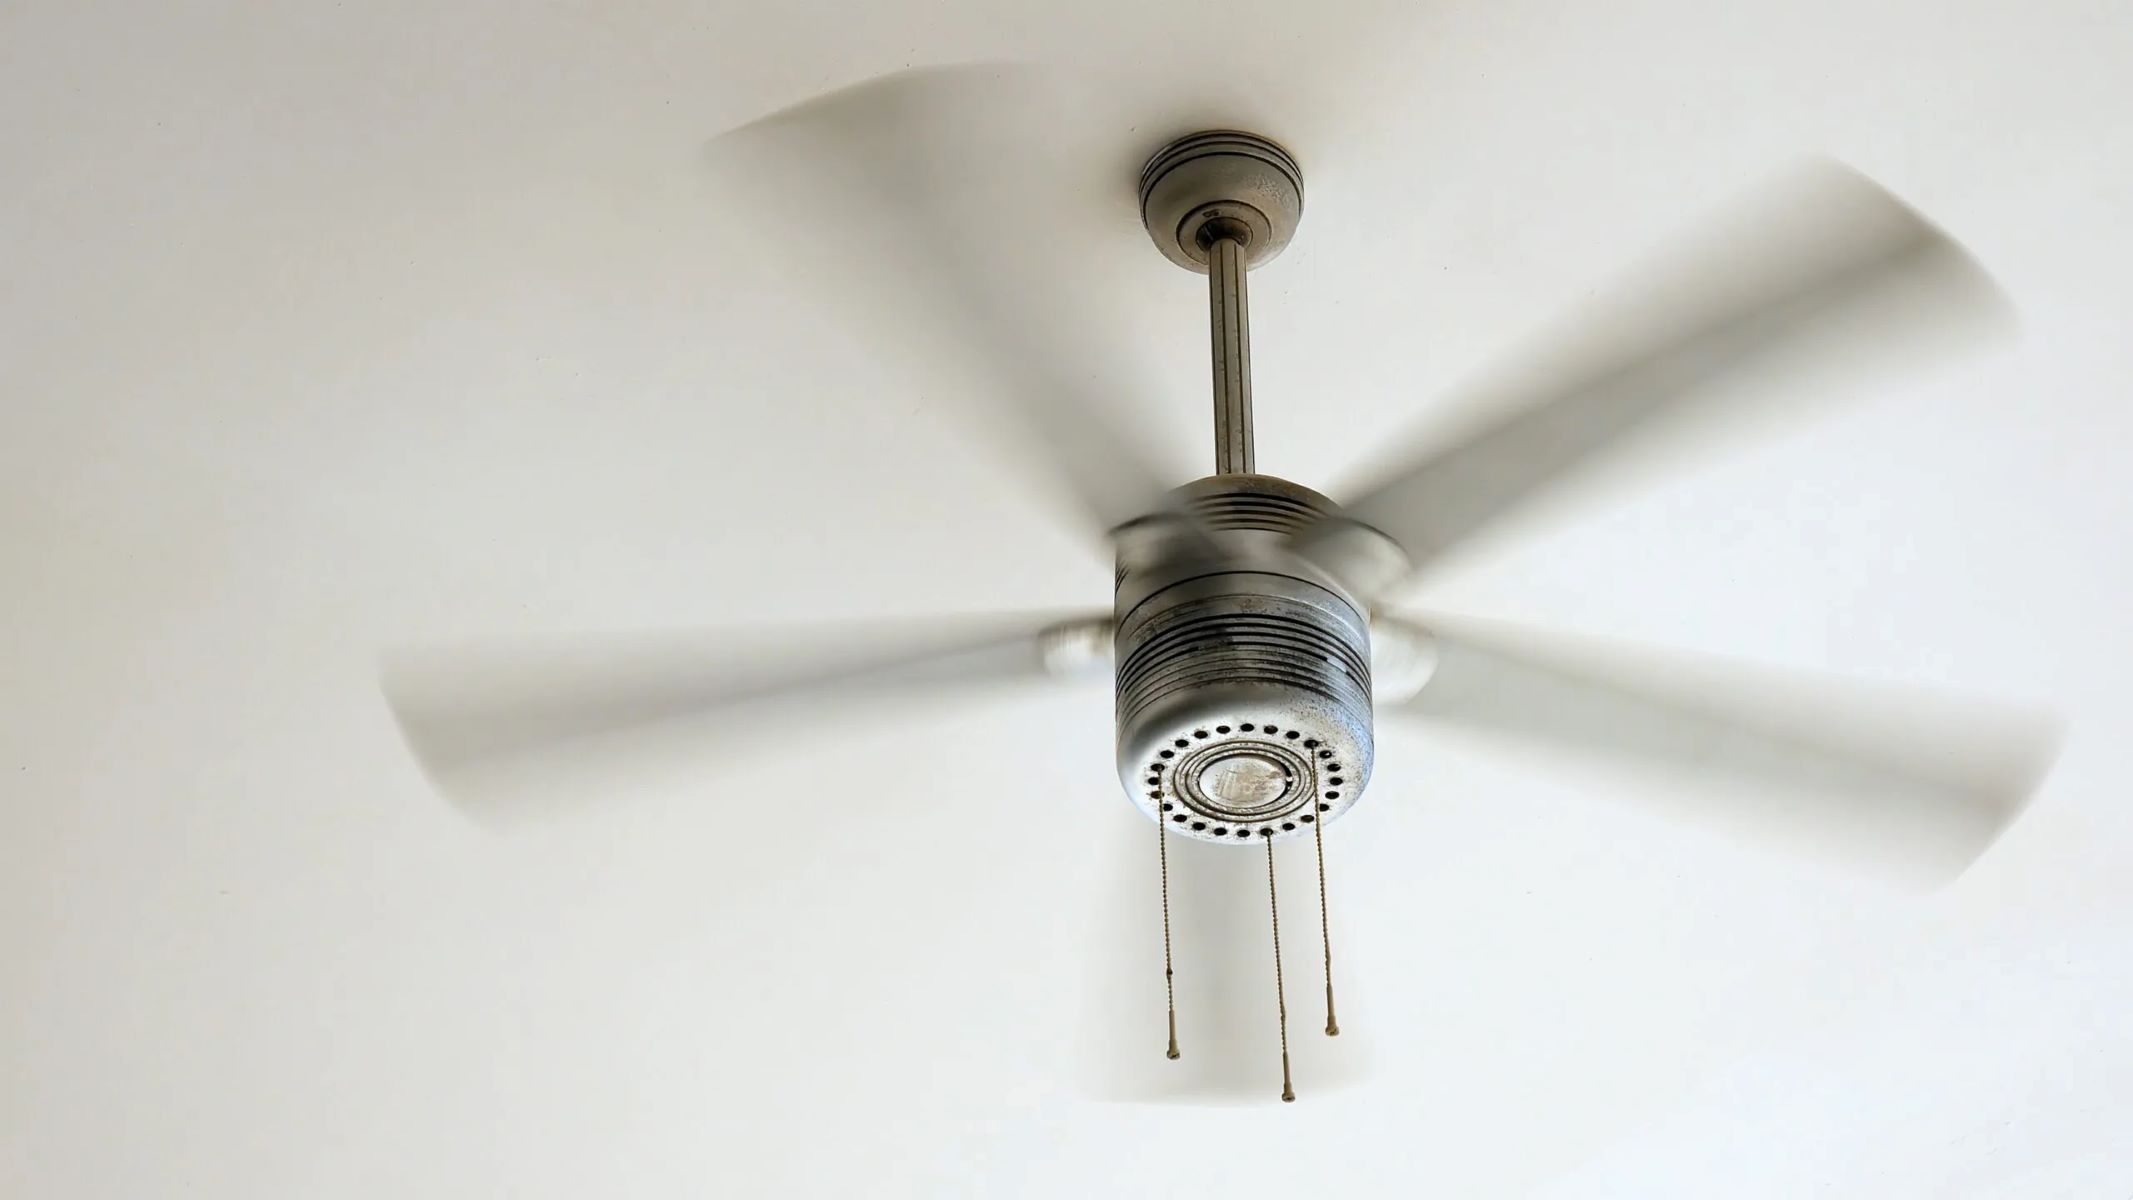 Say Goodbye To Annoying Squeaks And Reverse Rotation With This Simple Fix For Your Ceiling Fan!